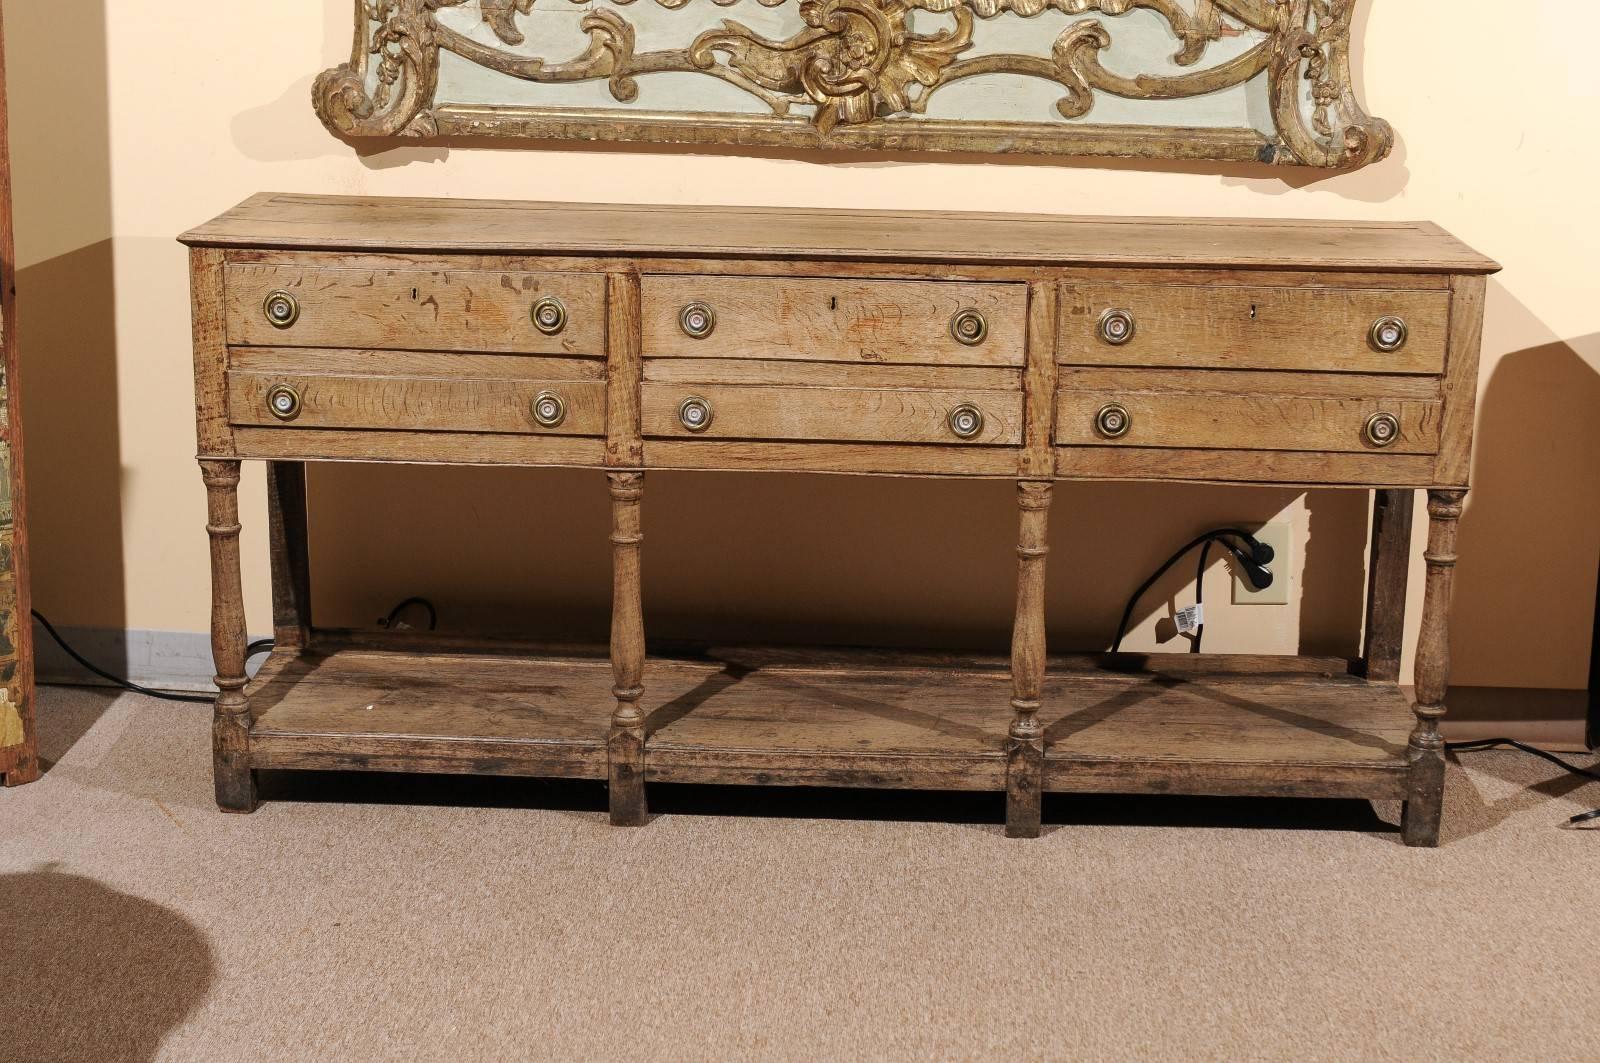 18th century English oak dresser base with lower plinth and turned legs in bleached finish. The piece has five drawers--a central deep drawer flanked by two shallow drawers flanking each side.